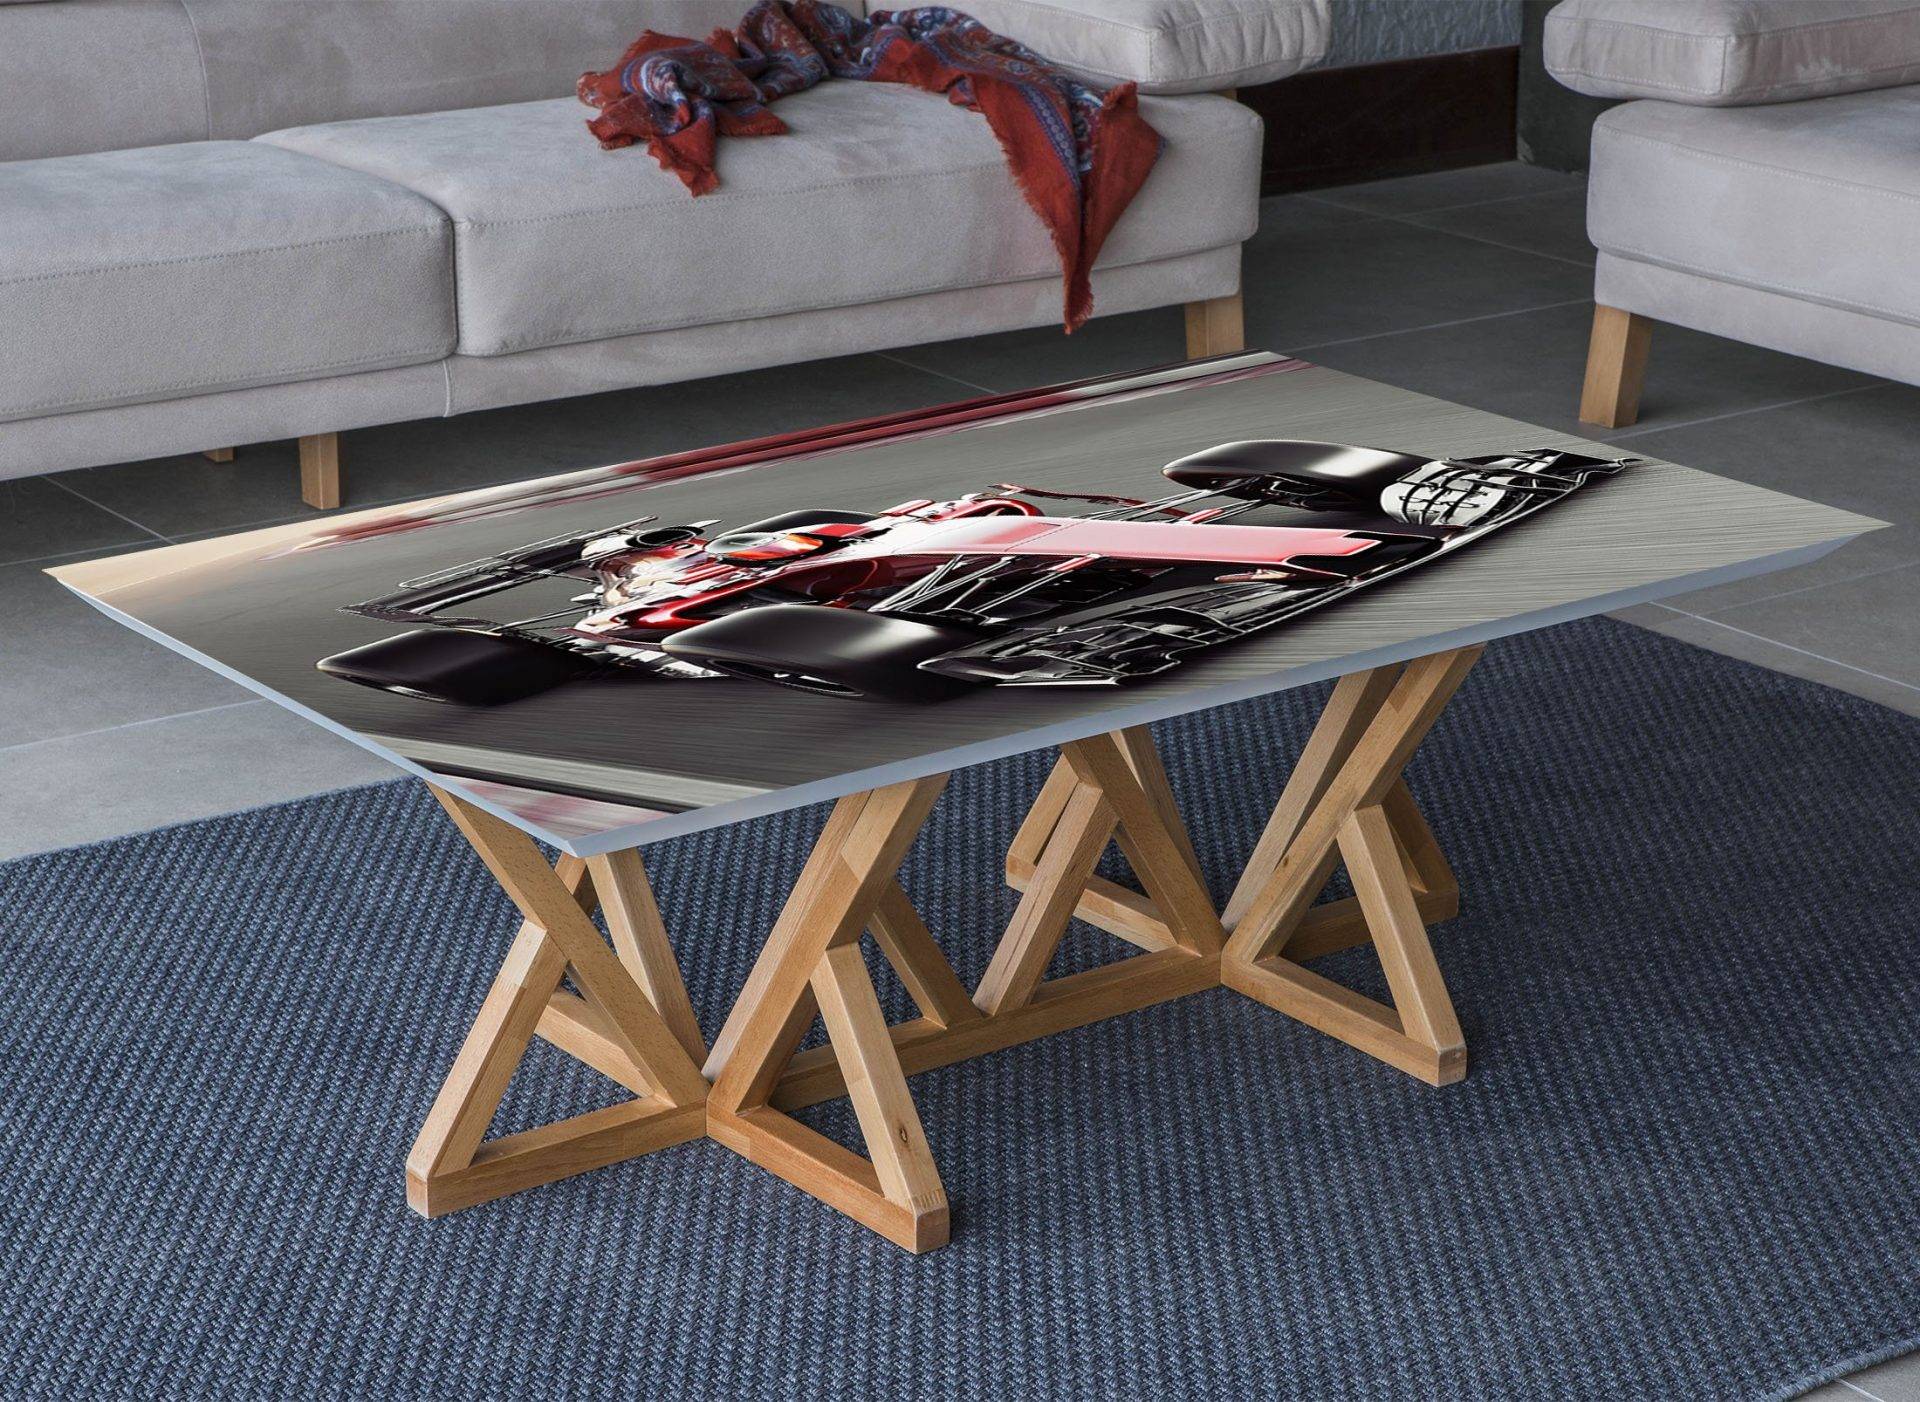 Formula Races Car Laminated Vinyl Cover Self-Adhesive for Desk and Tables